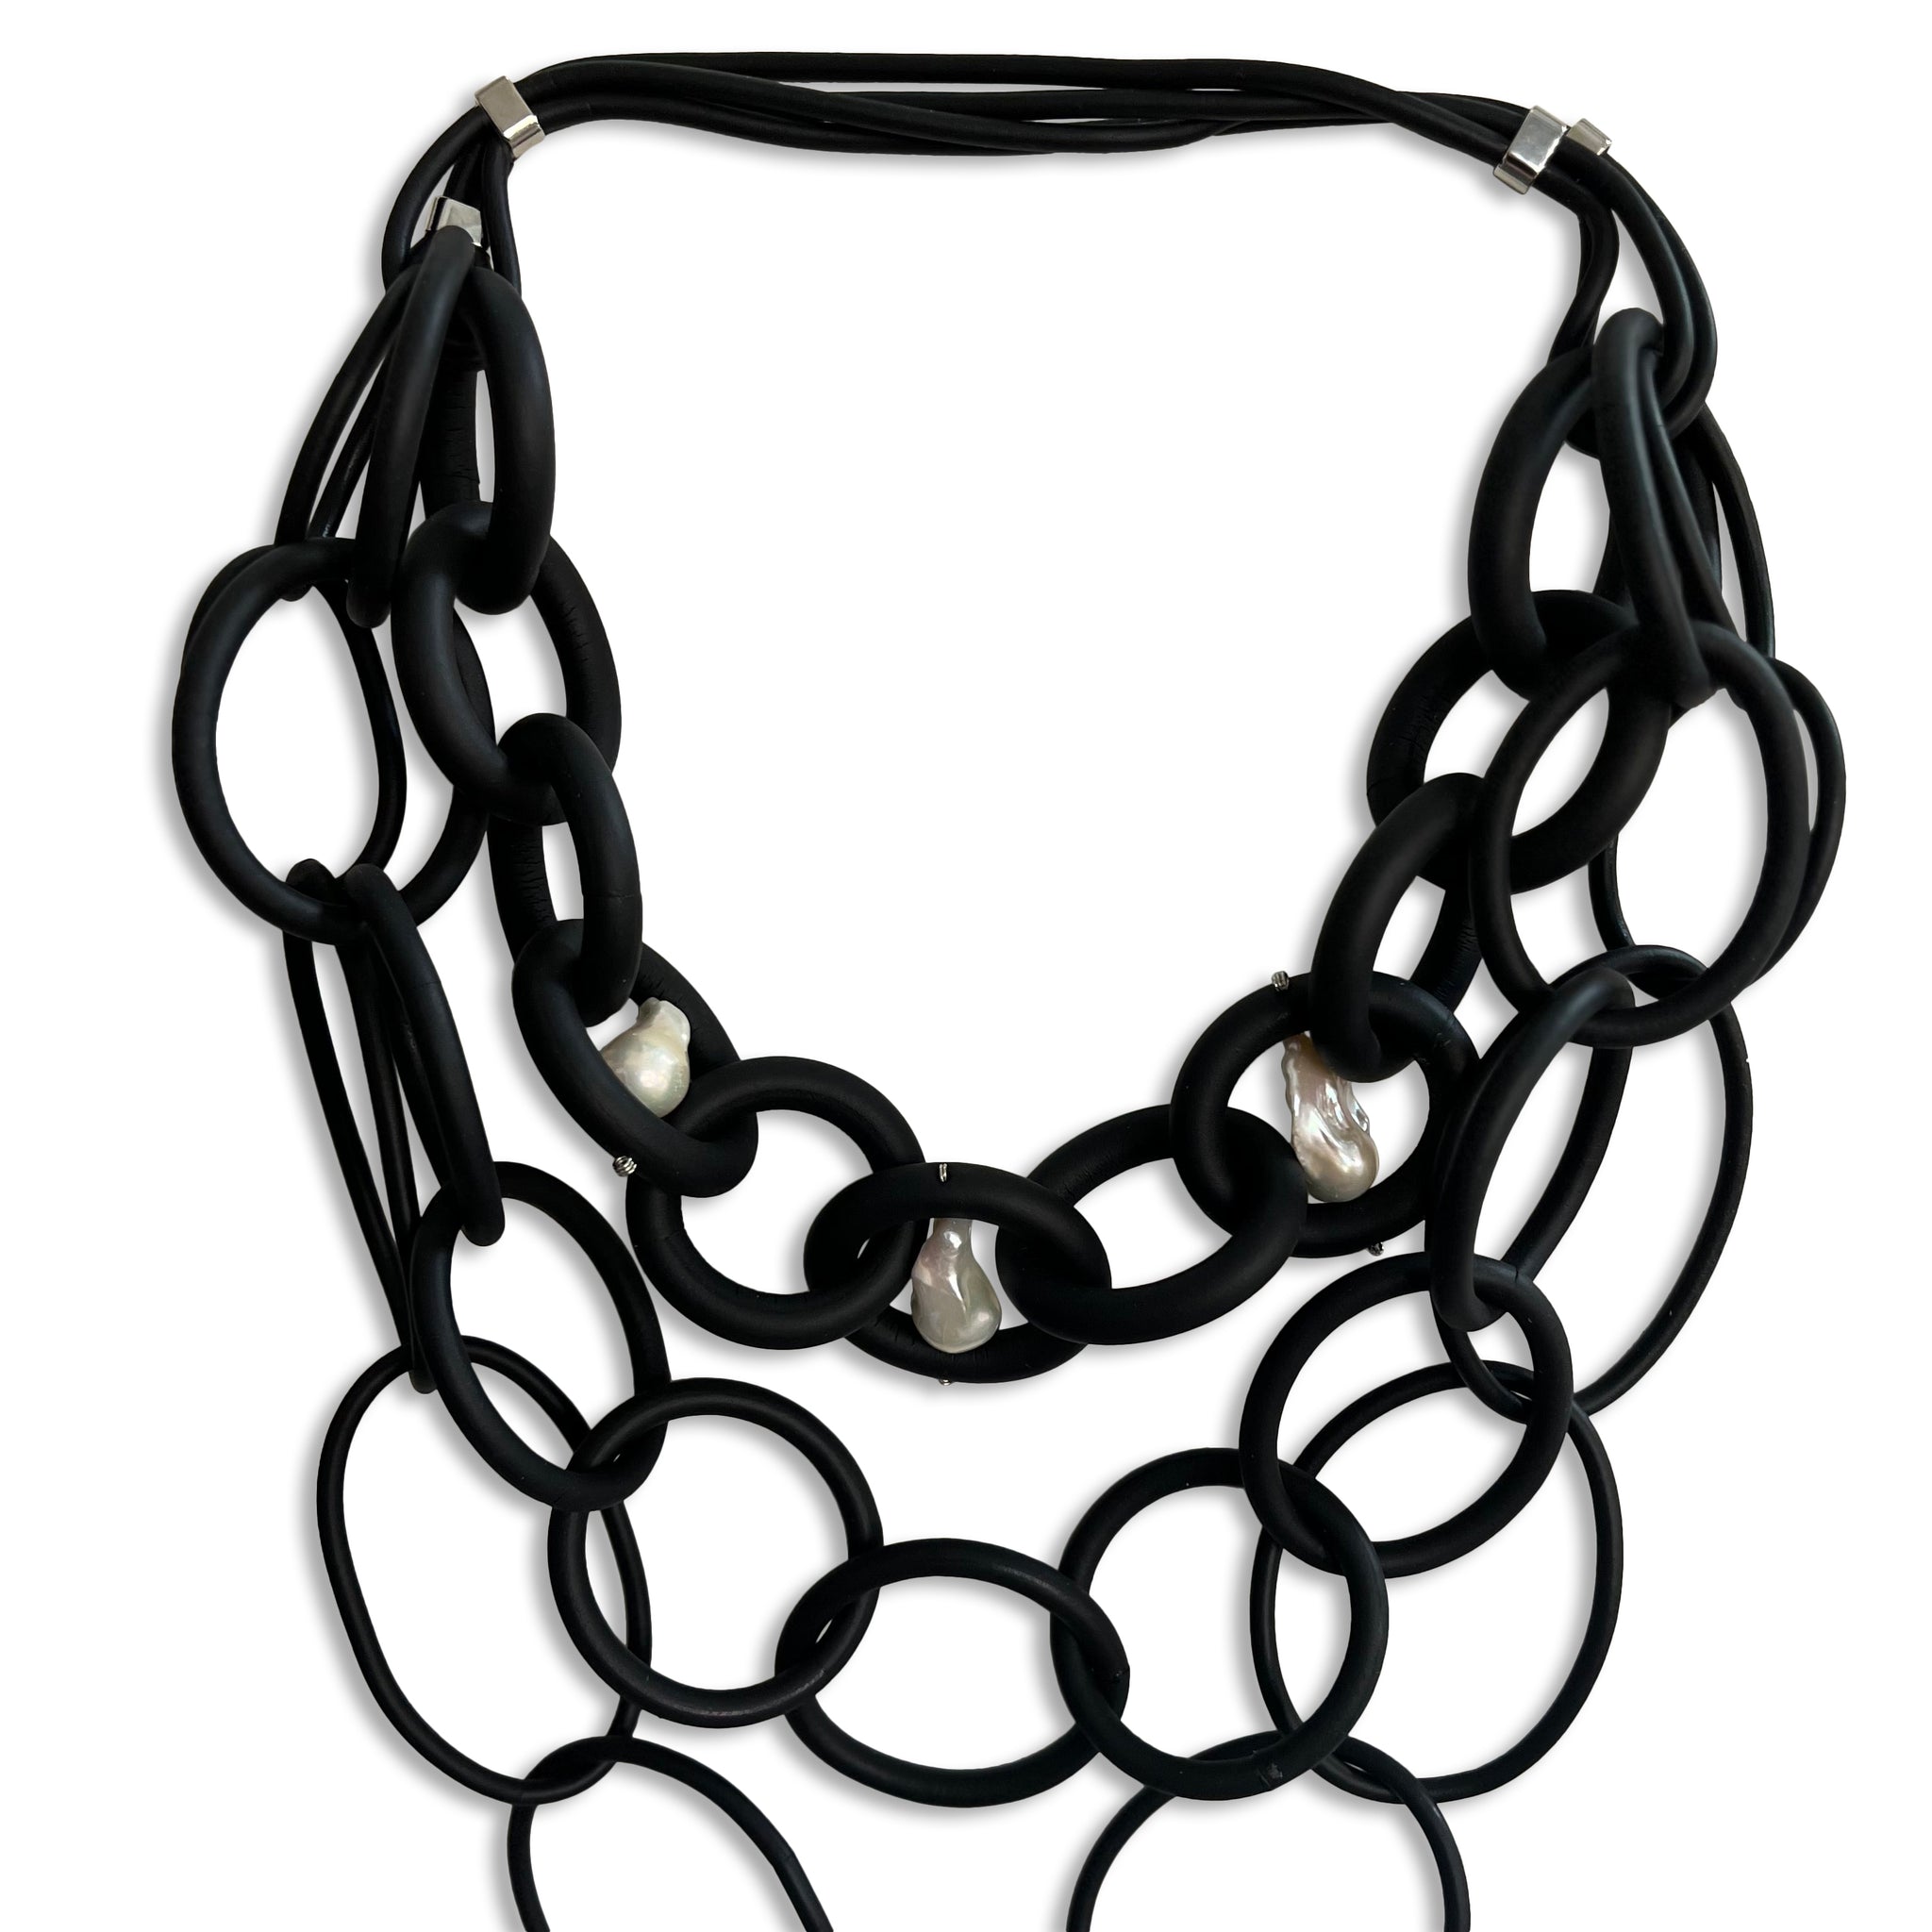 Buy Globus Black Statement Necklace at Amazon.in